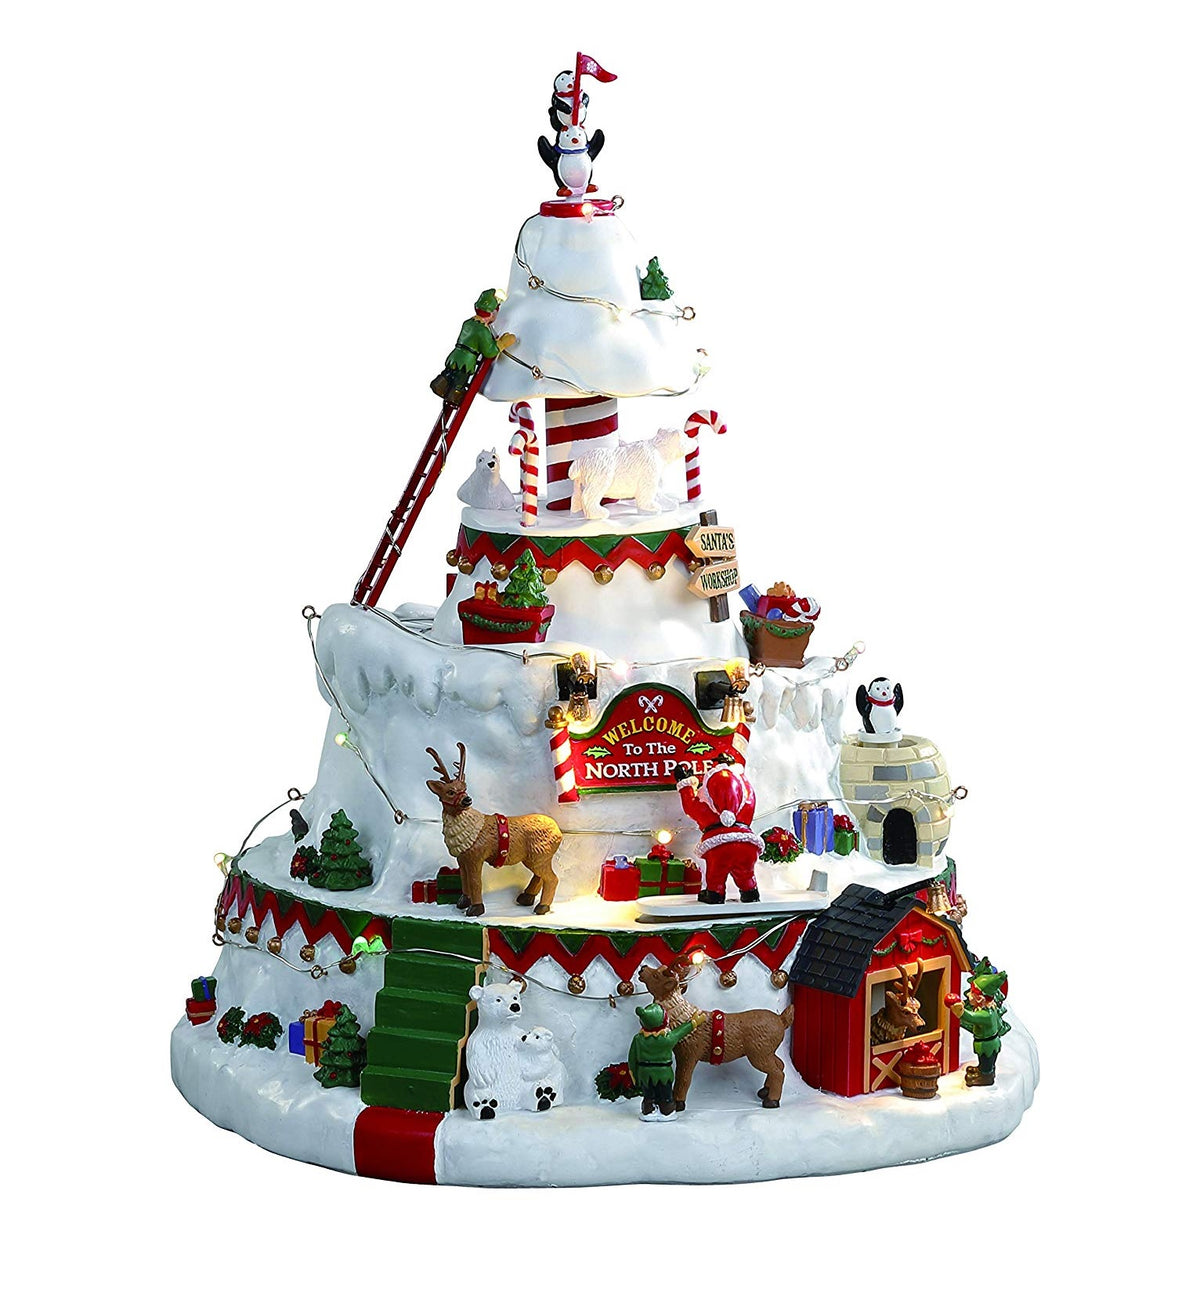 Lemax 84348 Christmas North Pole Tower, Multicolored